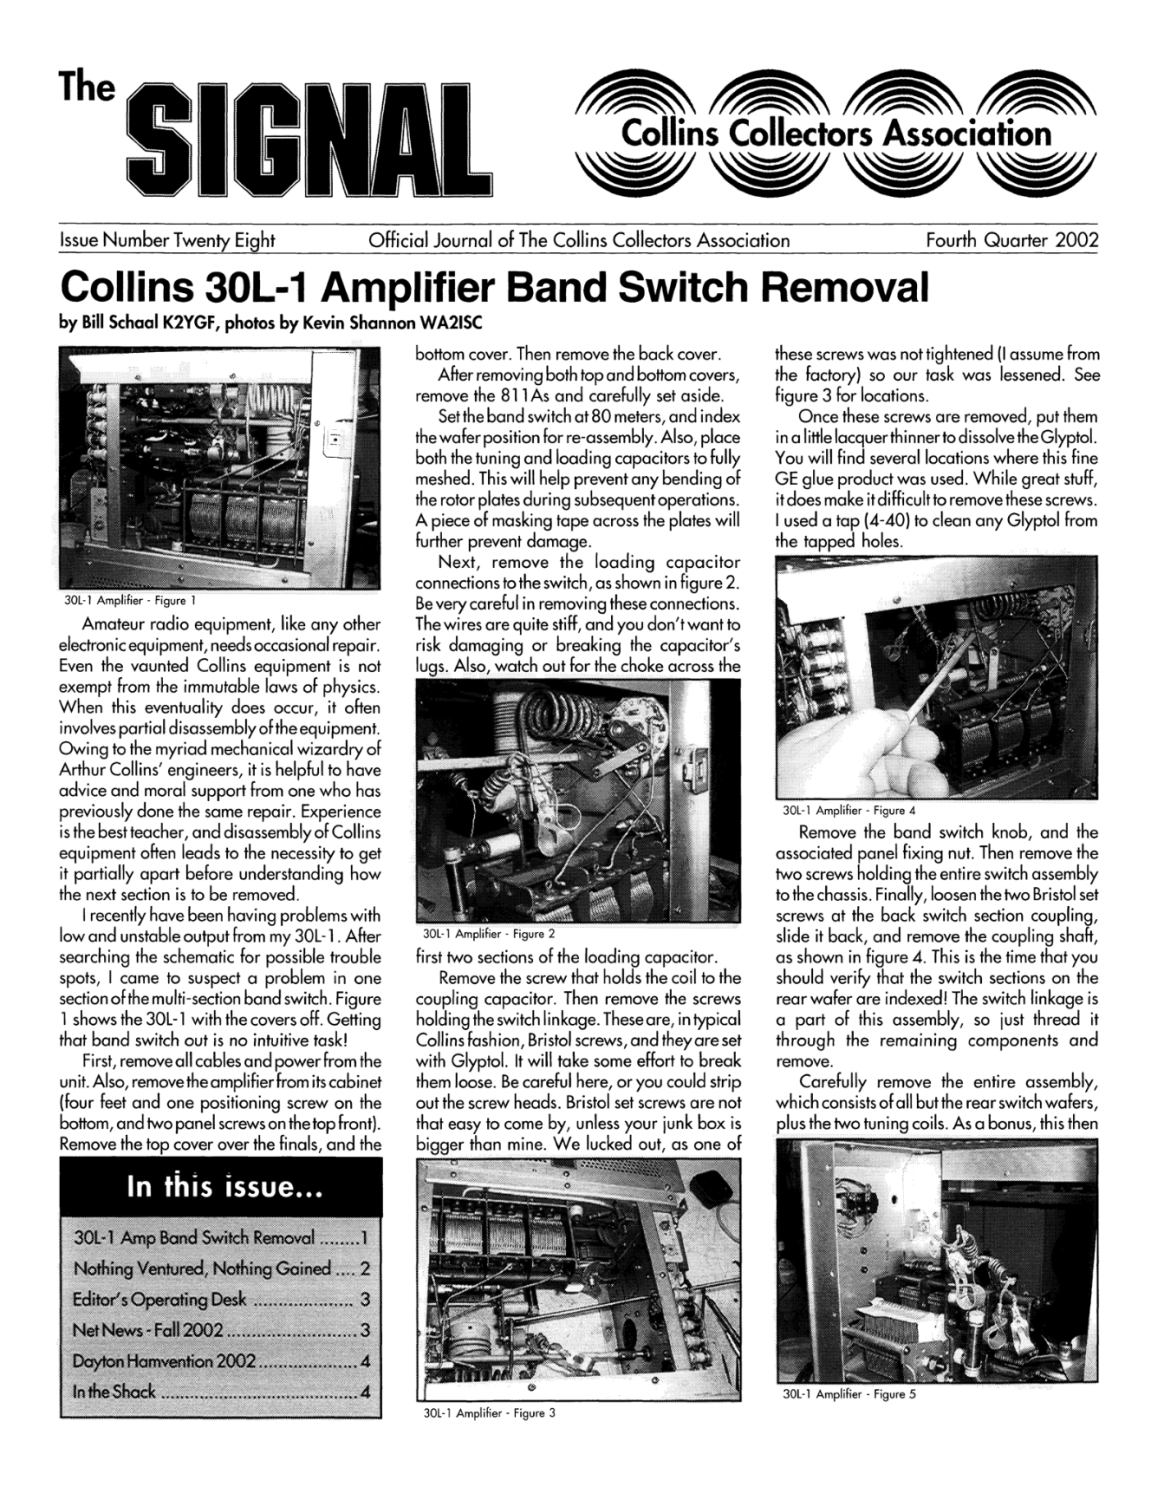 Collins 30L-1 - RF Linear Amplifier - Bandswitch Removal Replacement (The Signal, Issue 28 (2002)